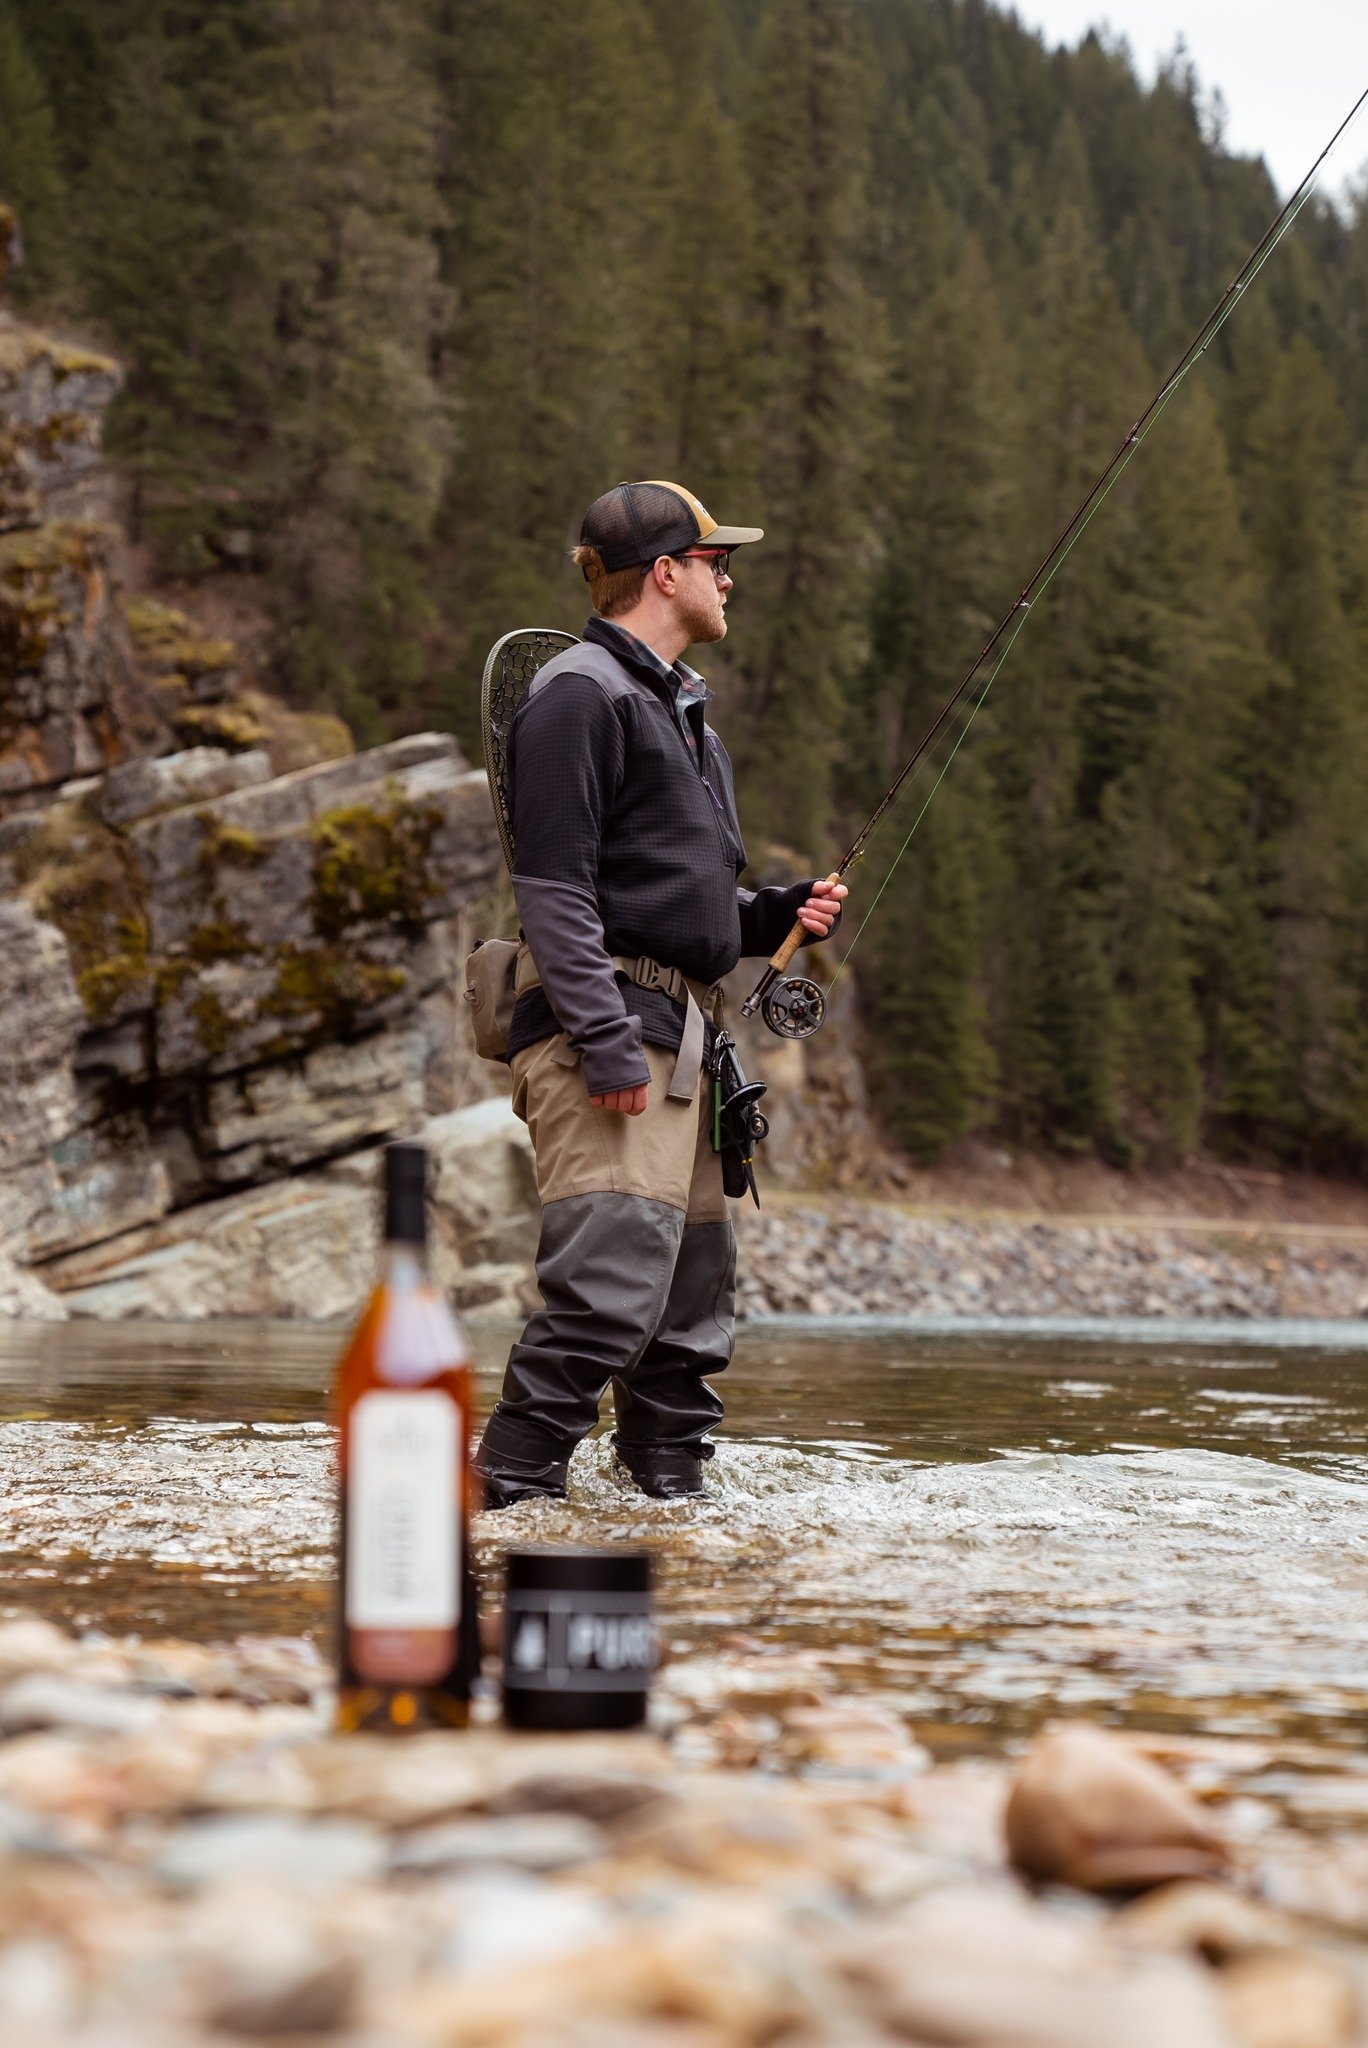 Fishing for a new #PacificNorthwest adventure! 🎣 Where will your next adventure take you? Bring along a bottle of one our #CraftSpirits today! 🥃

- 
- 
- 
- 

#DistillingExperiences @SuspectWhiskey 📸 @FirstDropMedia #BeyondTheBottle #Whiskey #Craf